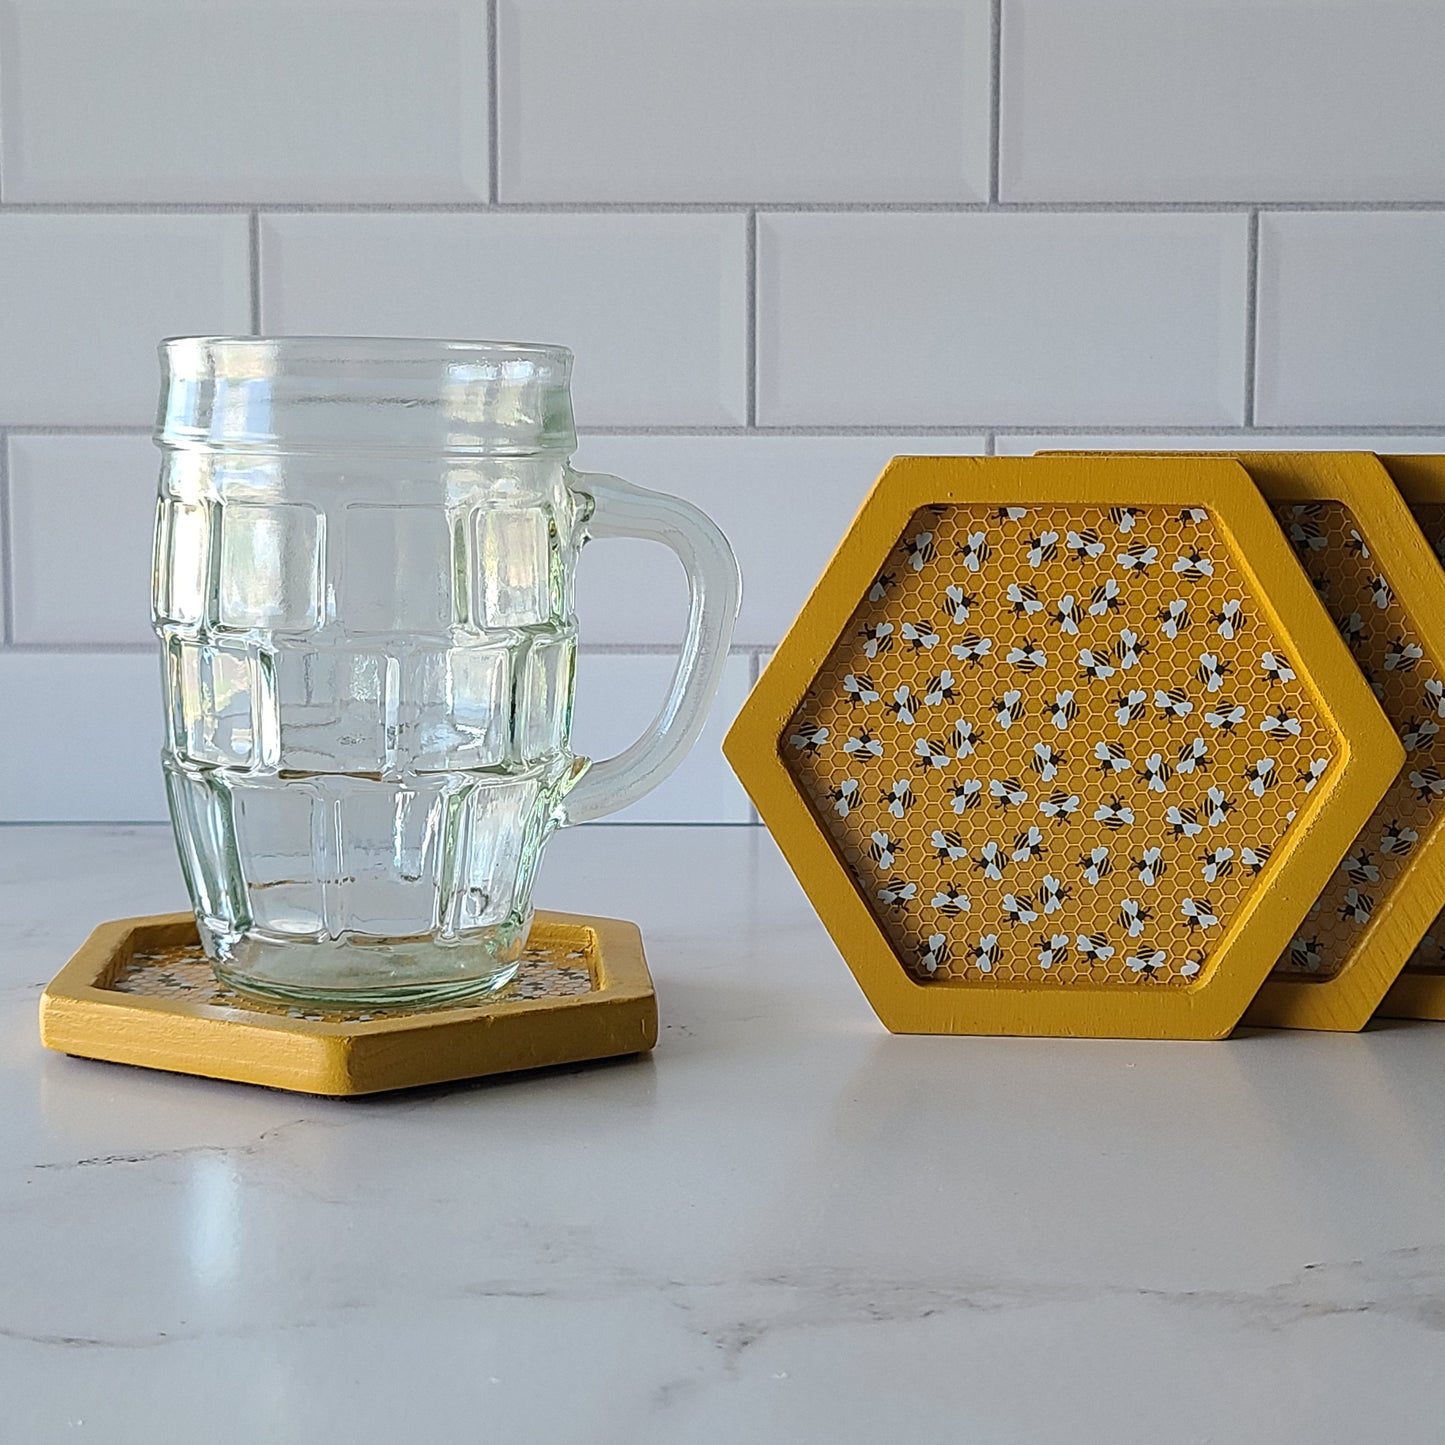 "Bees in a Honeycomb" Coaster